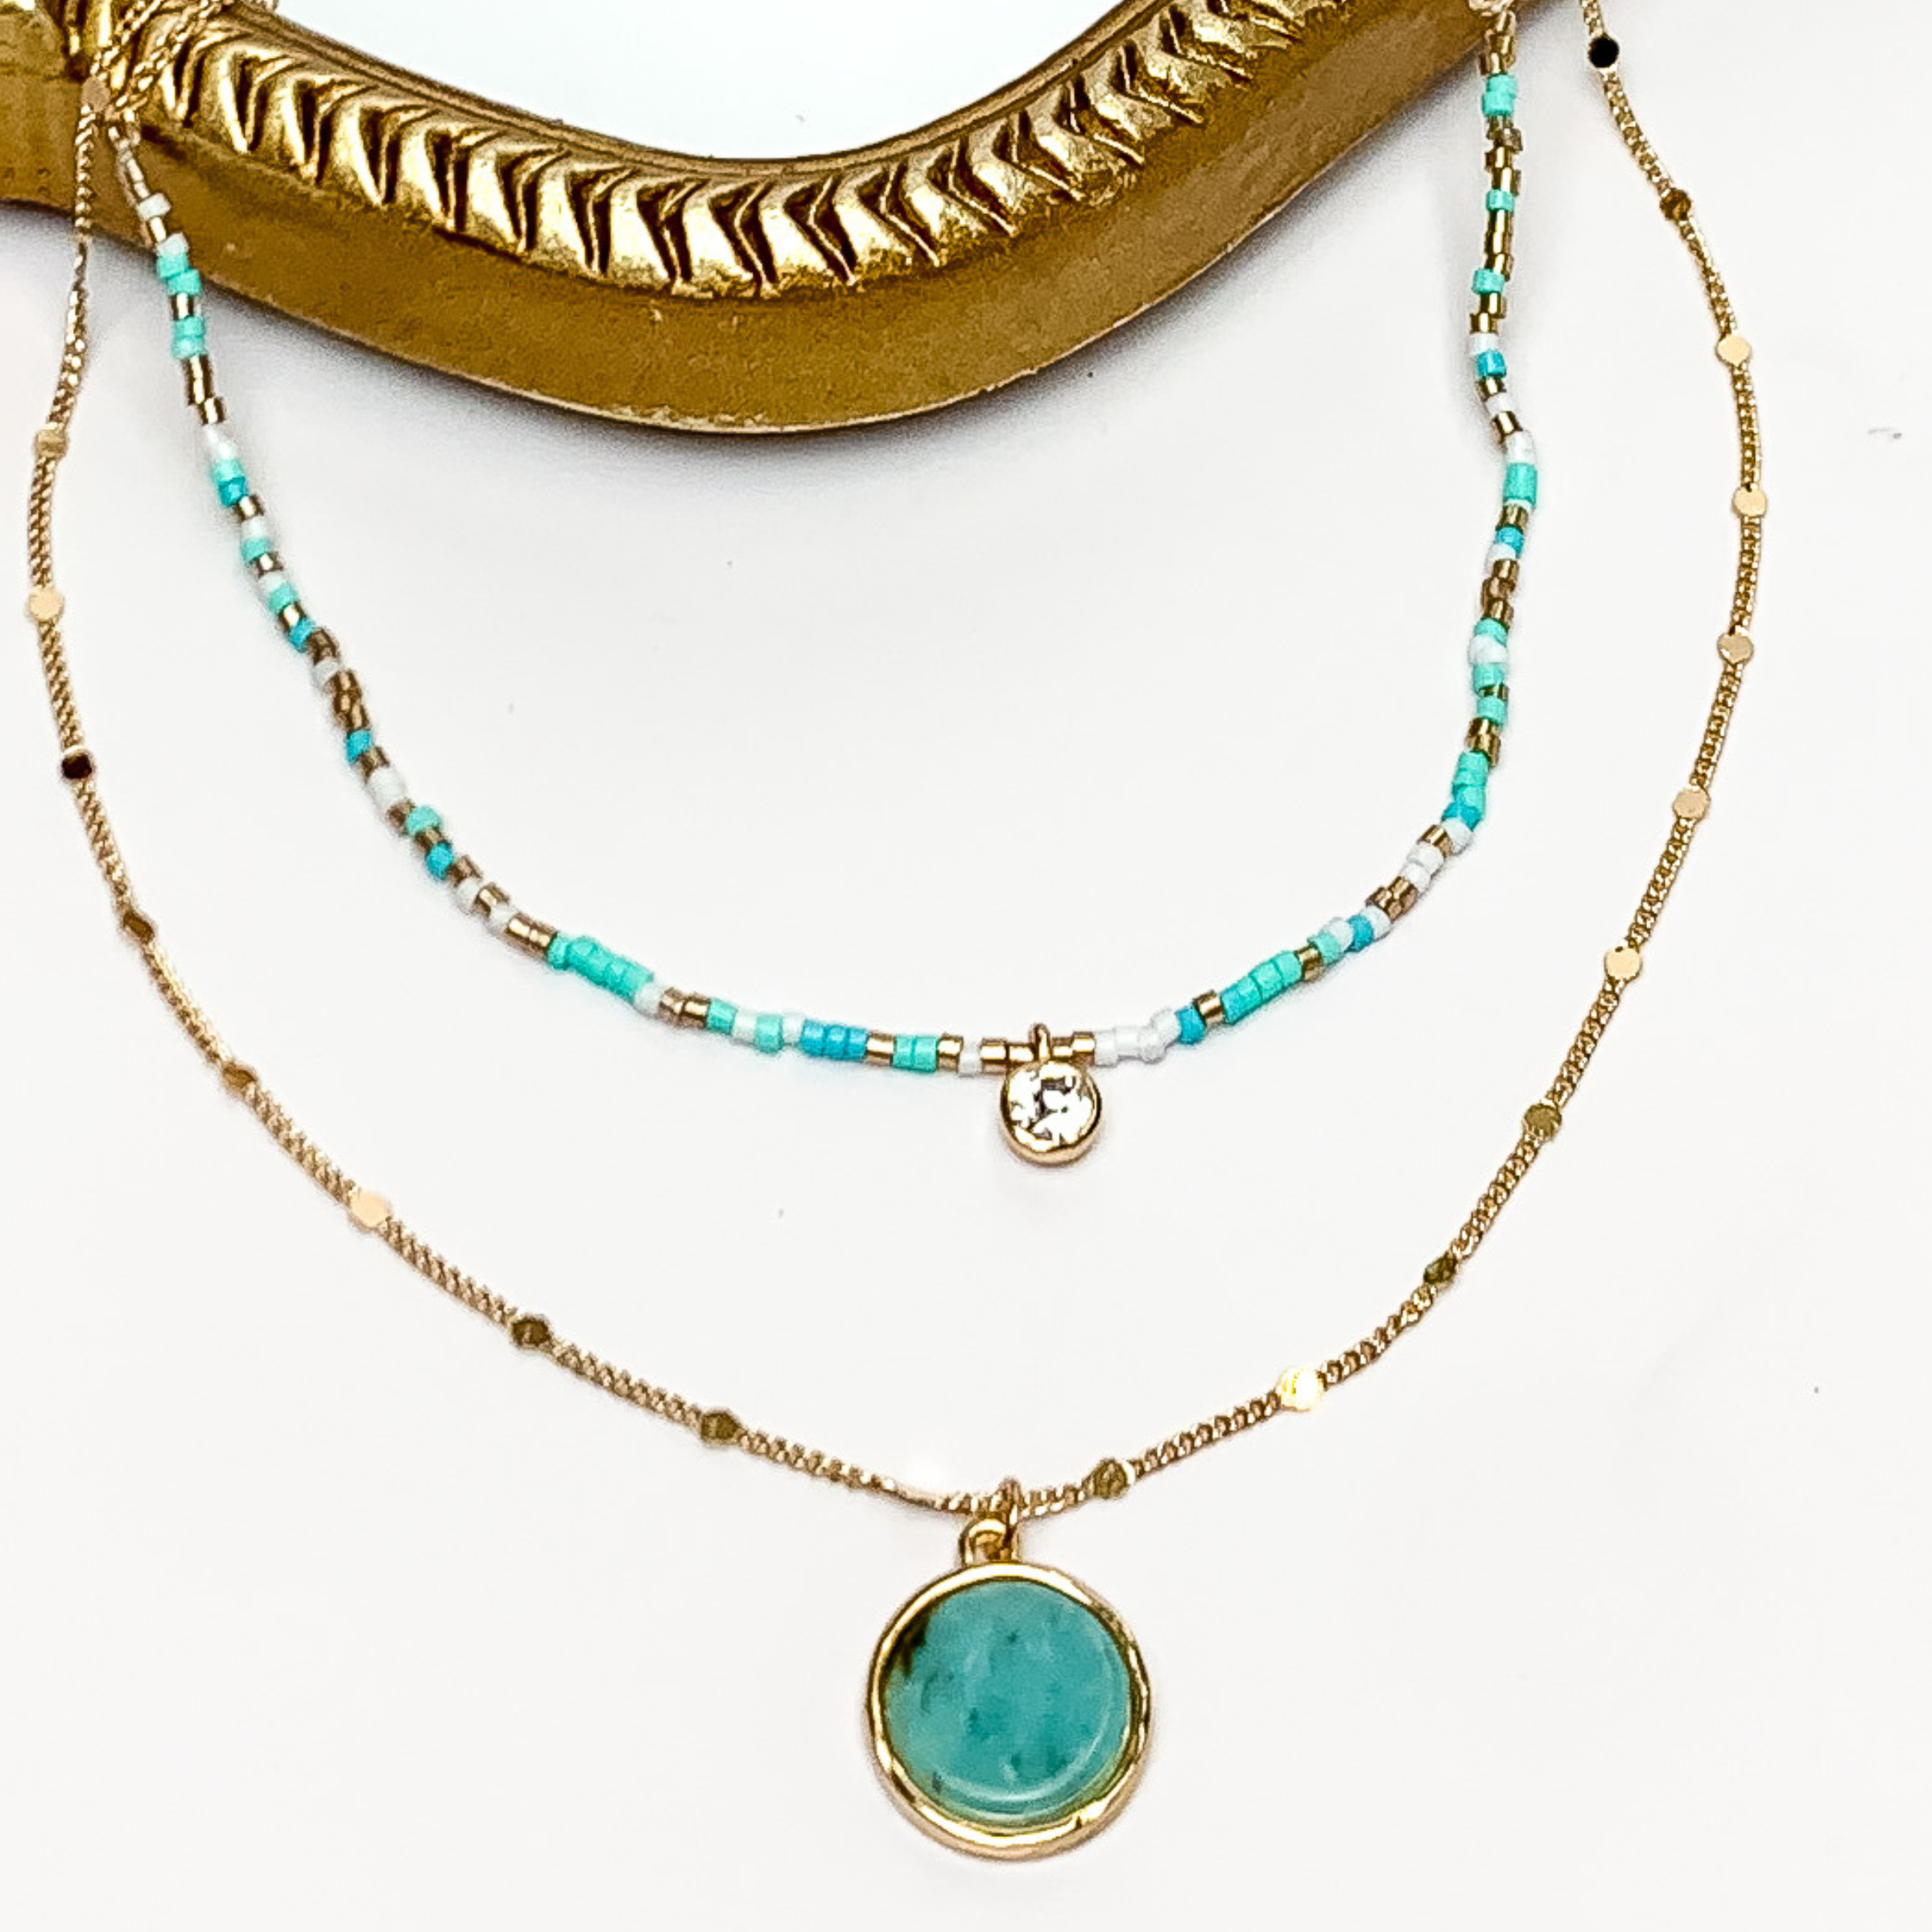 Turquoise Goddess Gold Tone Double Chain Necklace - Giddy Up Glamour Boutique